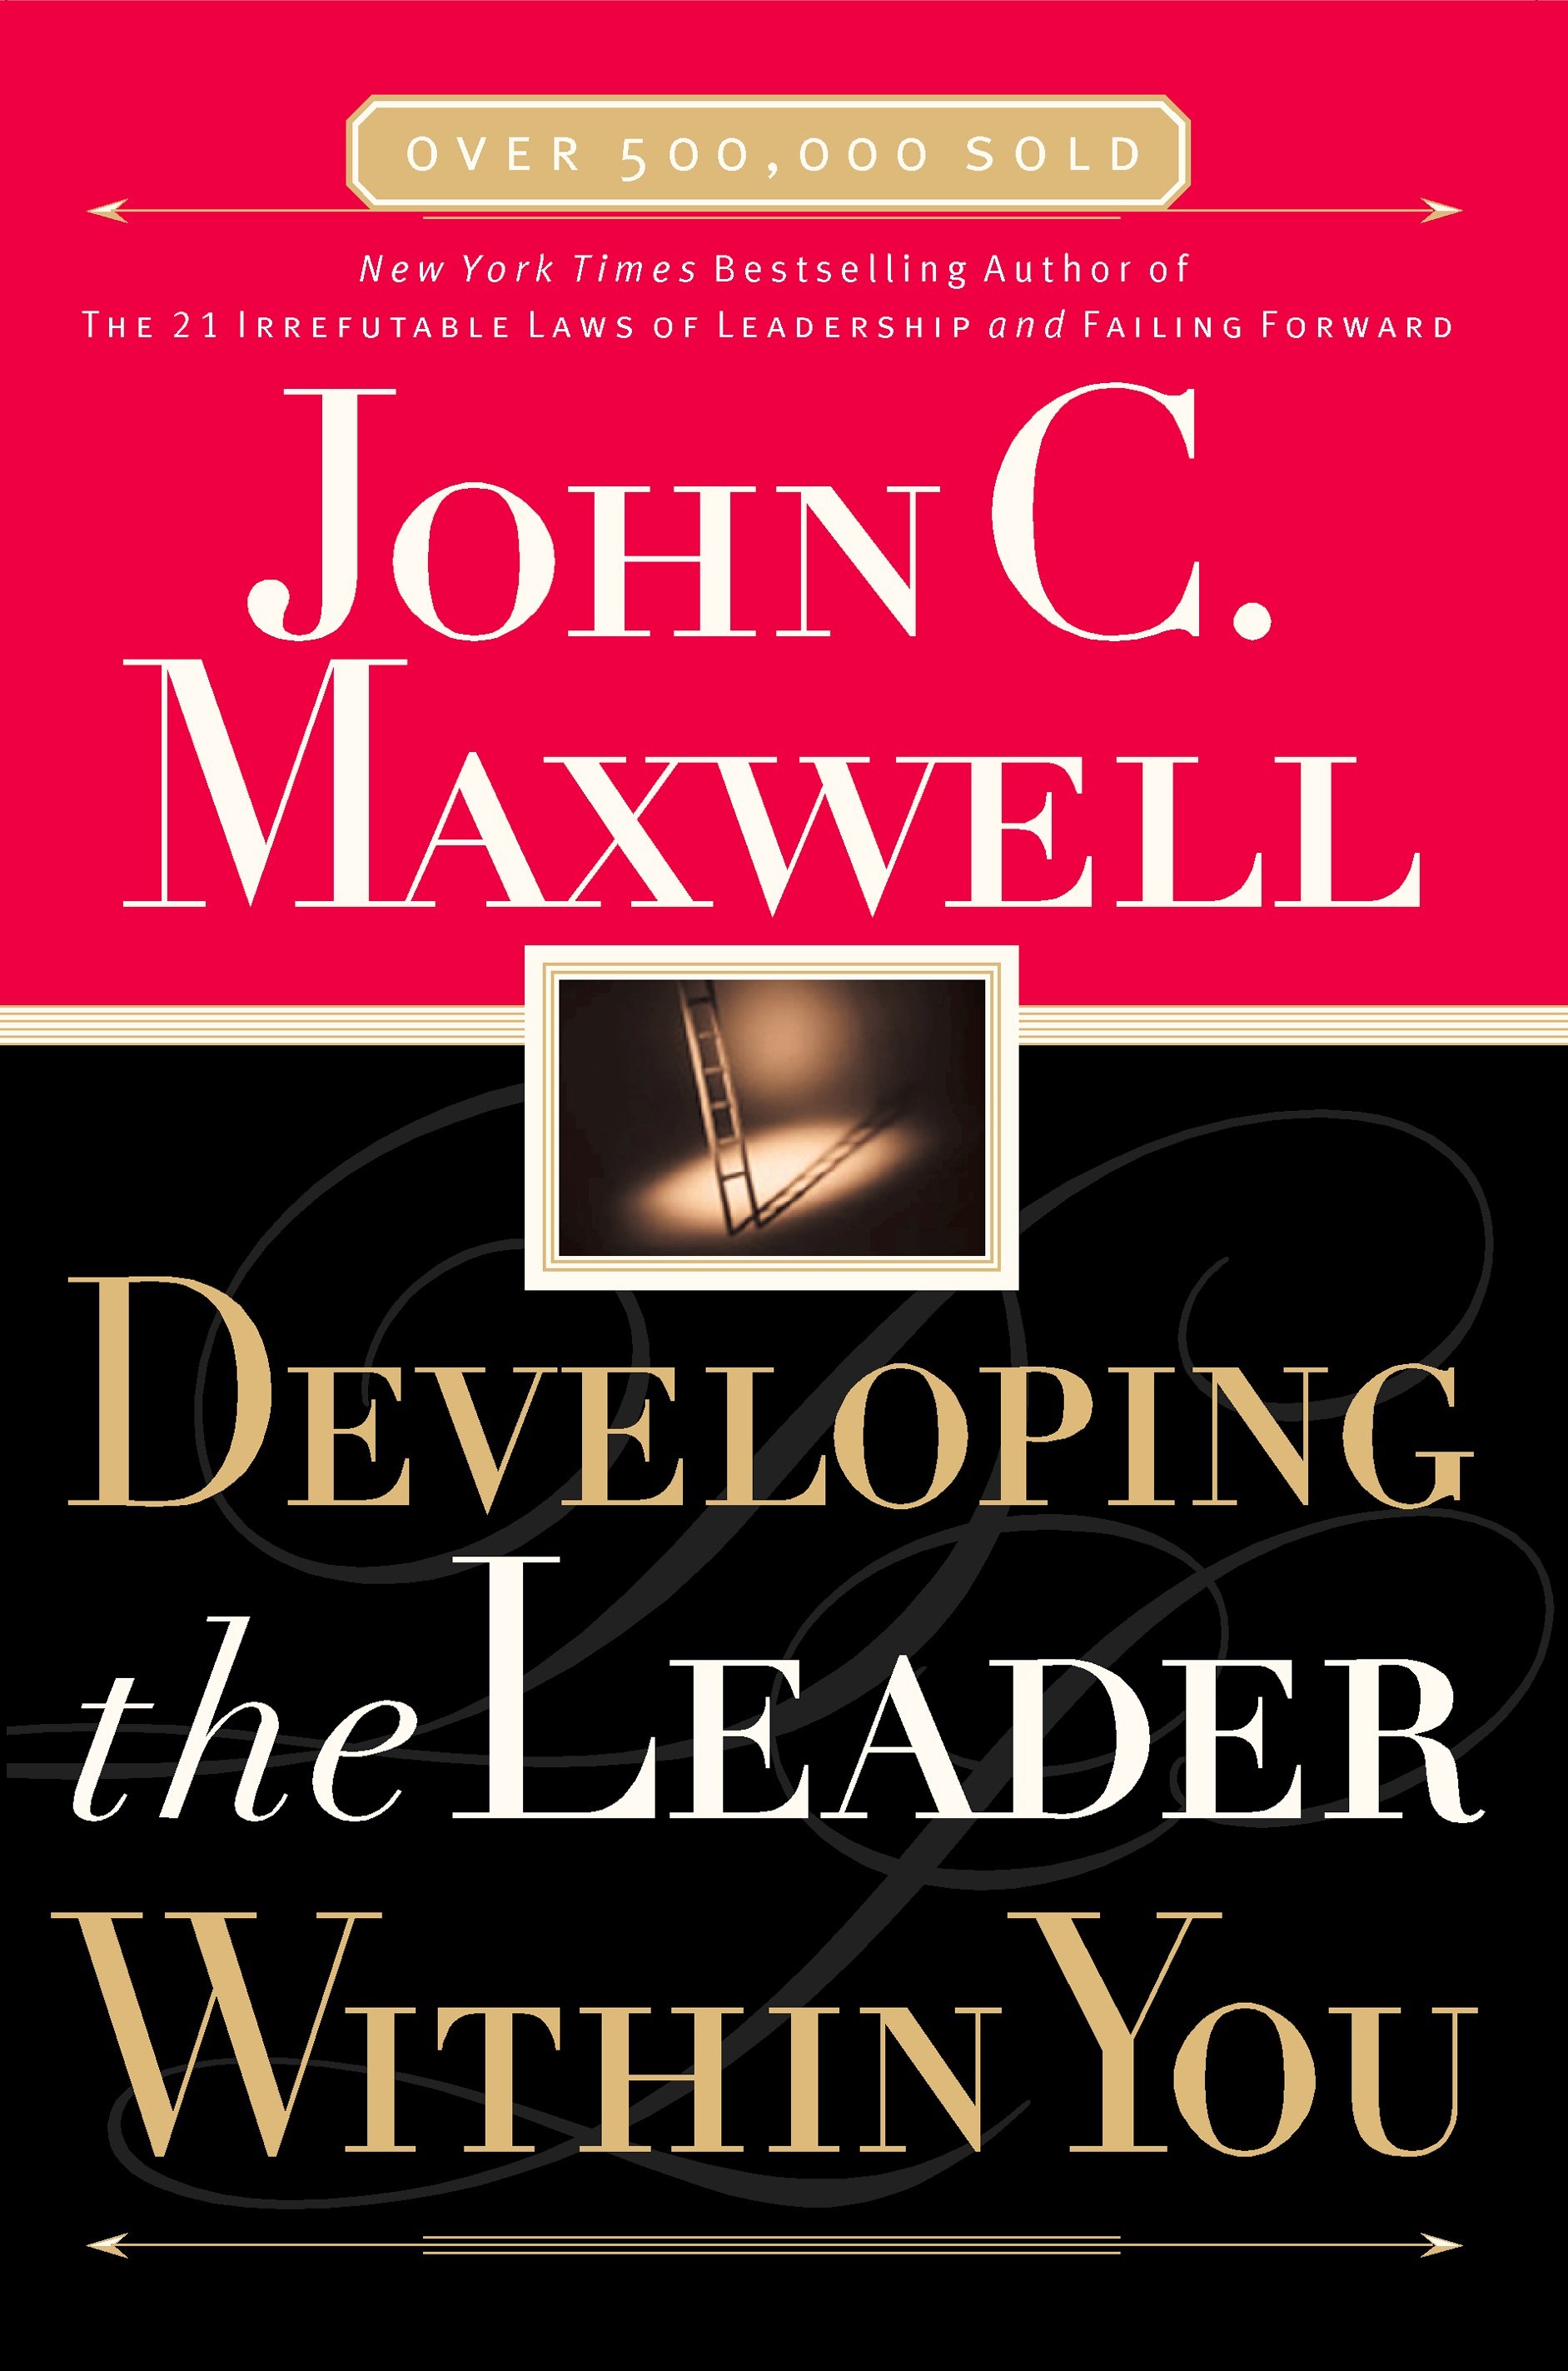 Developing The Leader Within You by John C Maxwell